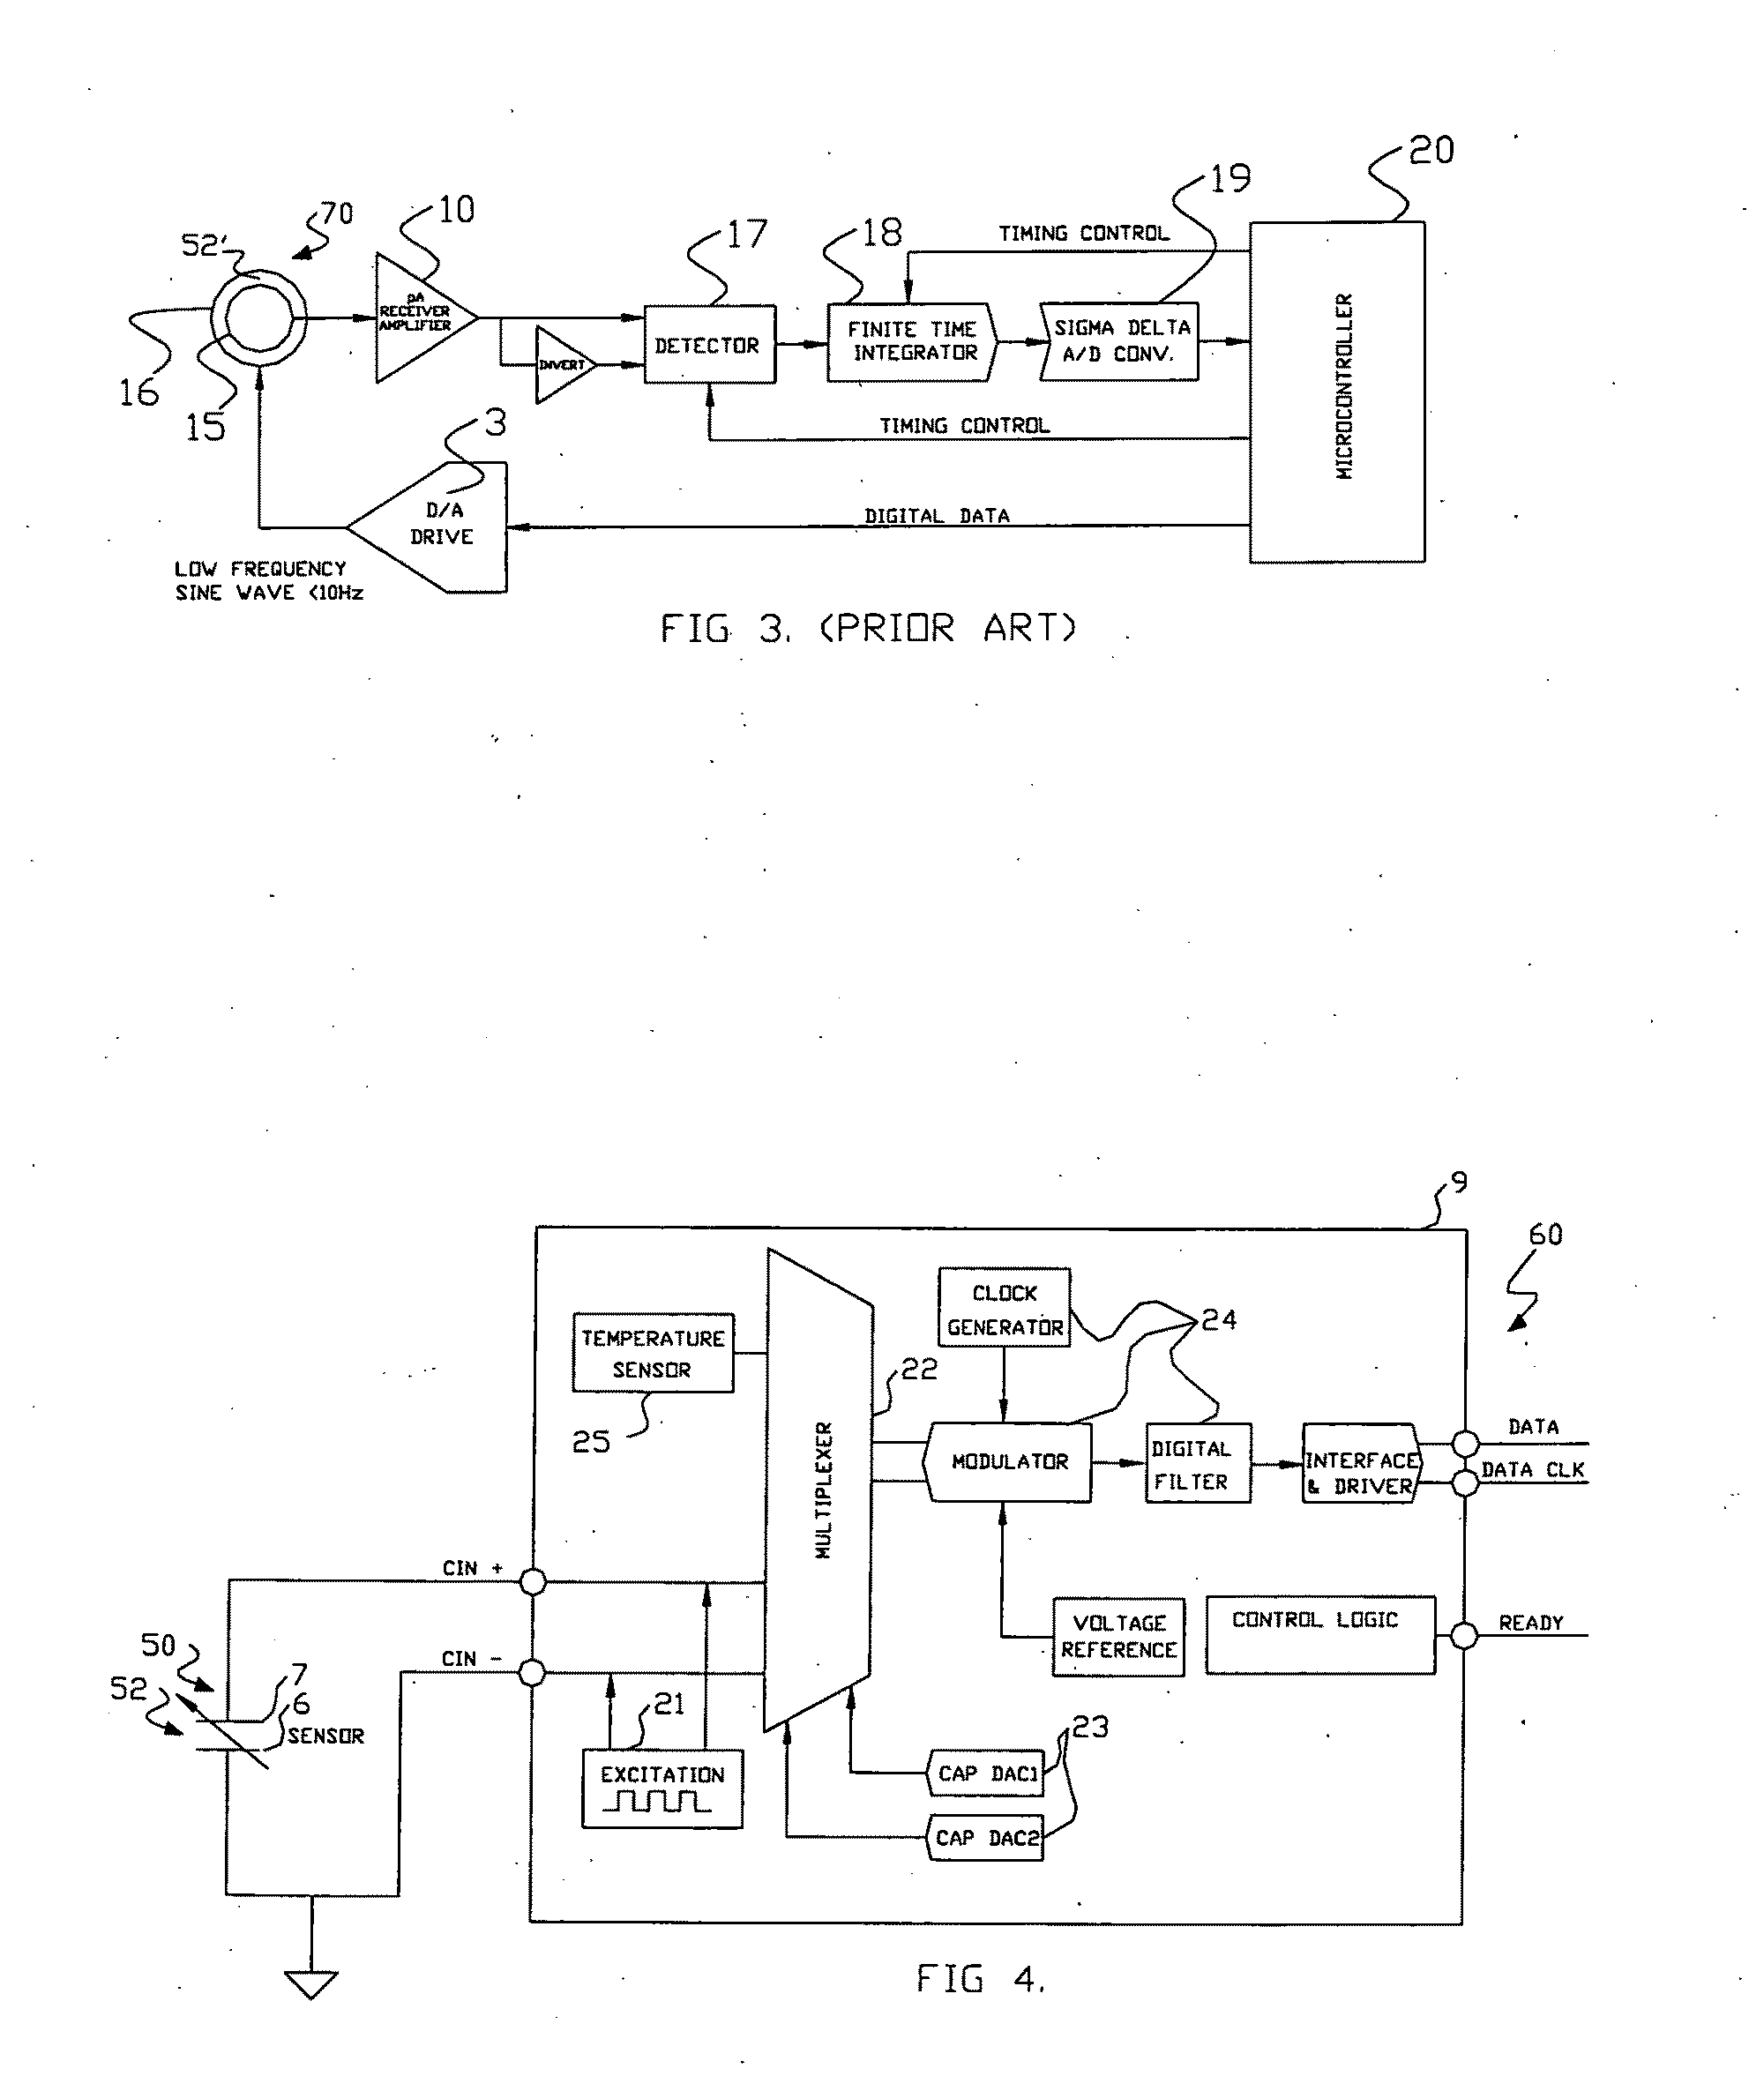 Apparatus and method for the measurement of electrical conductivity and dielectric constant of high impedance fluids